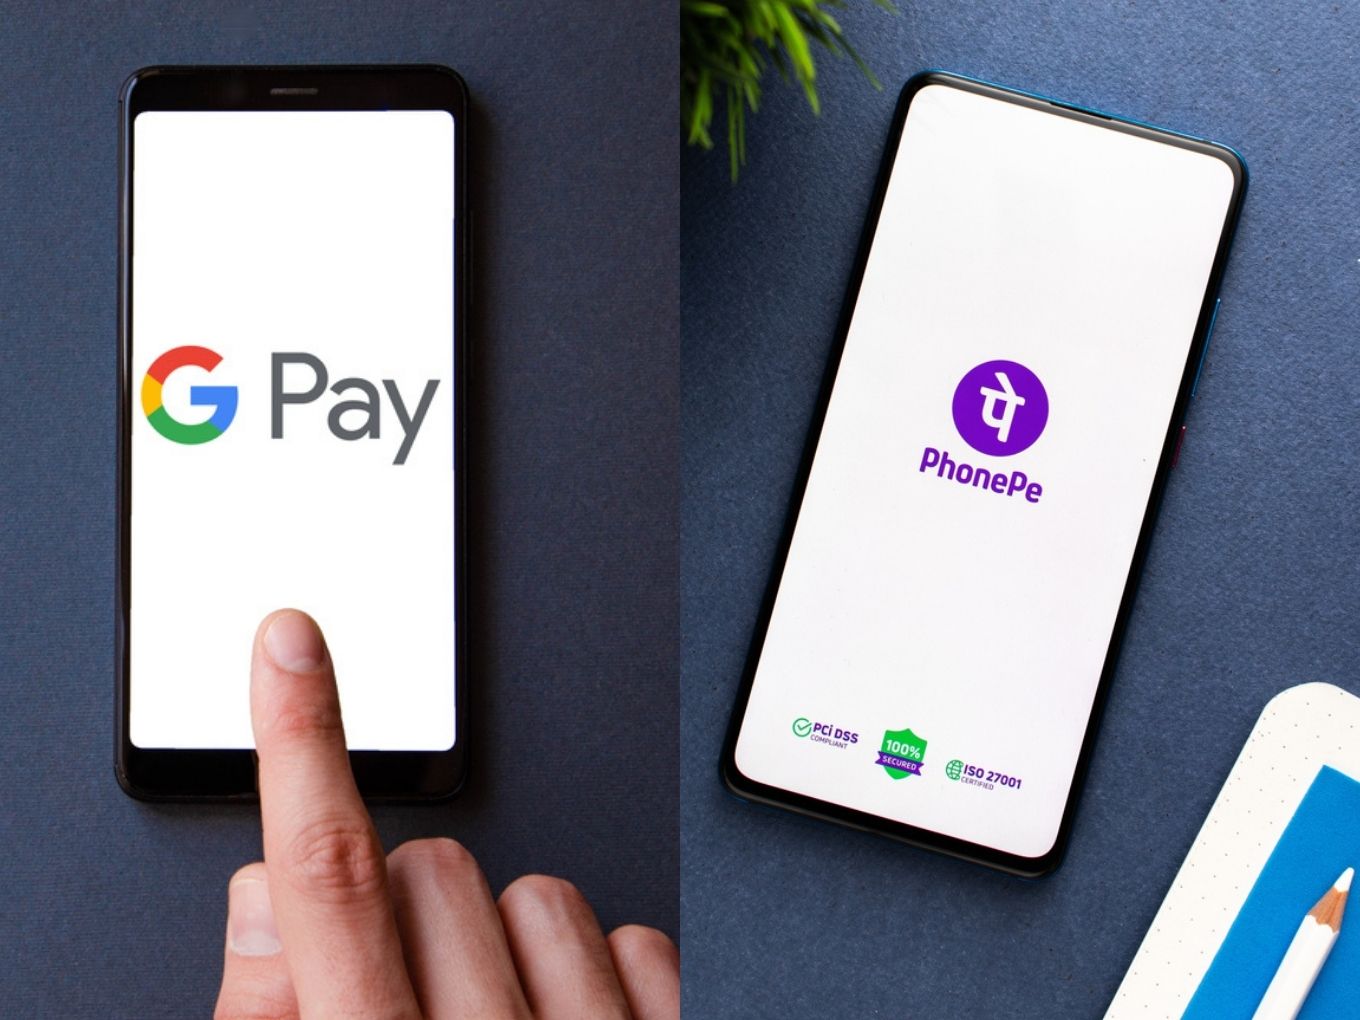 PhonePe Continues To Lead UPI Market; Google Pay Sees 5% Dip